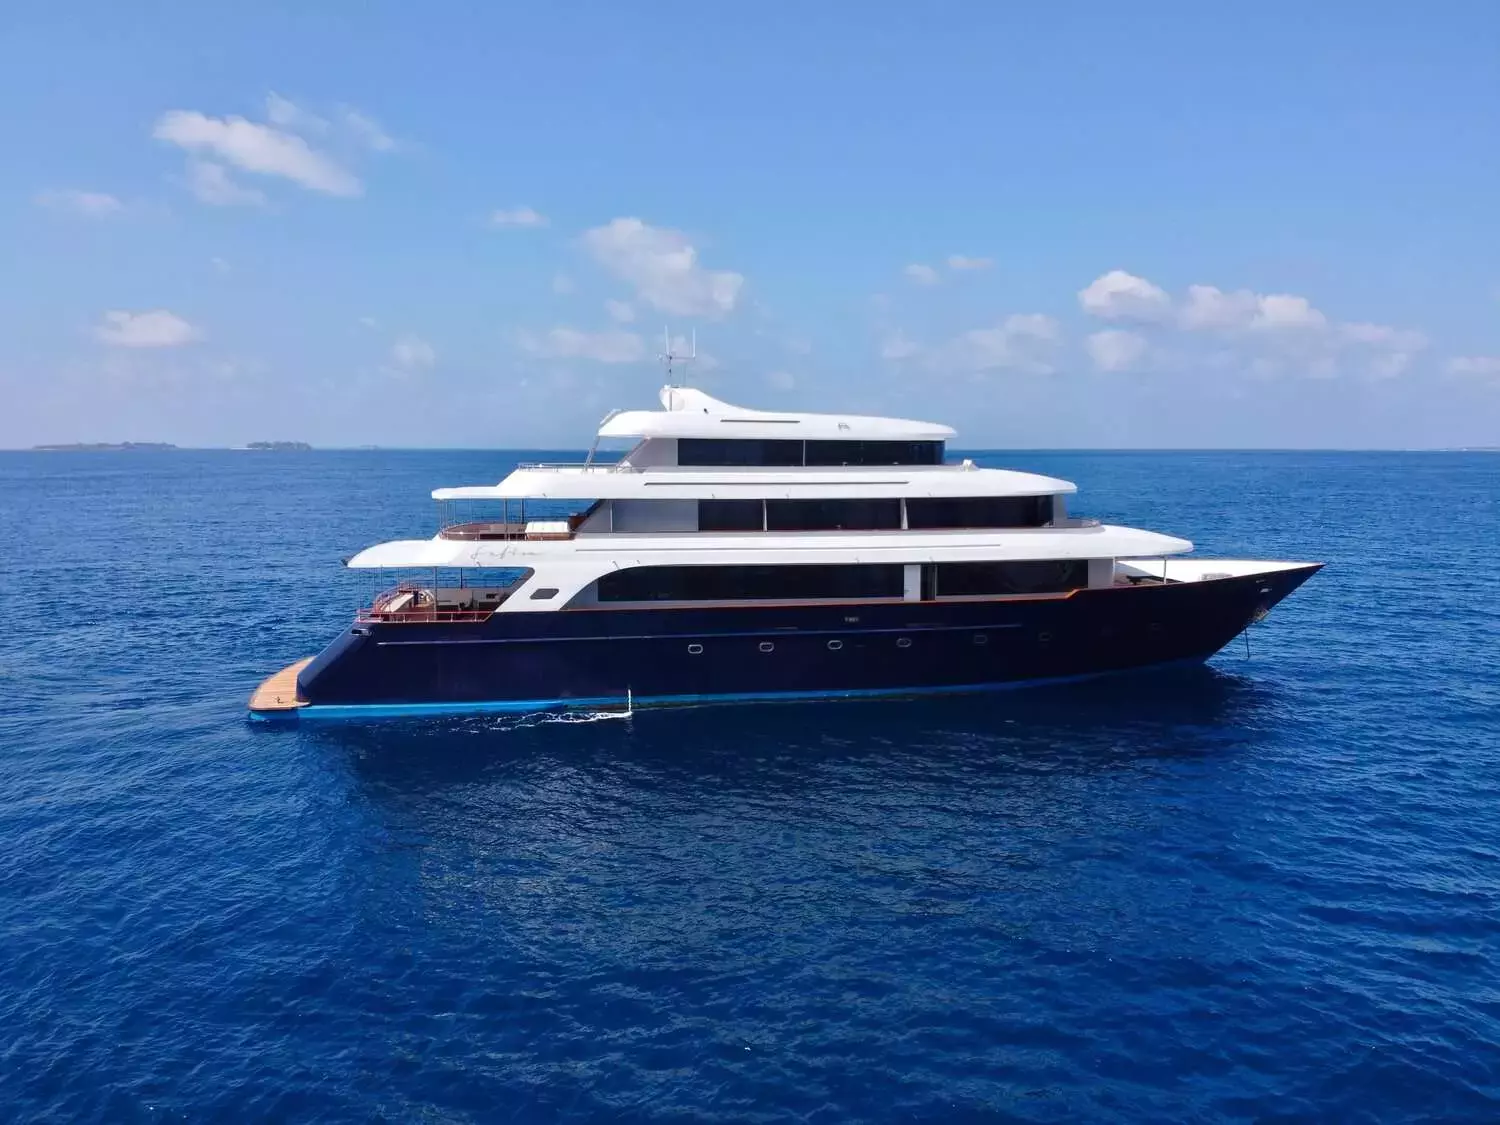 Safira by Custom Made - Top rates for a Rental of a private Superyacht in Maldives